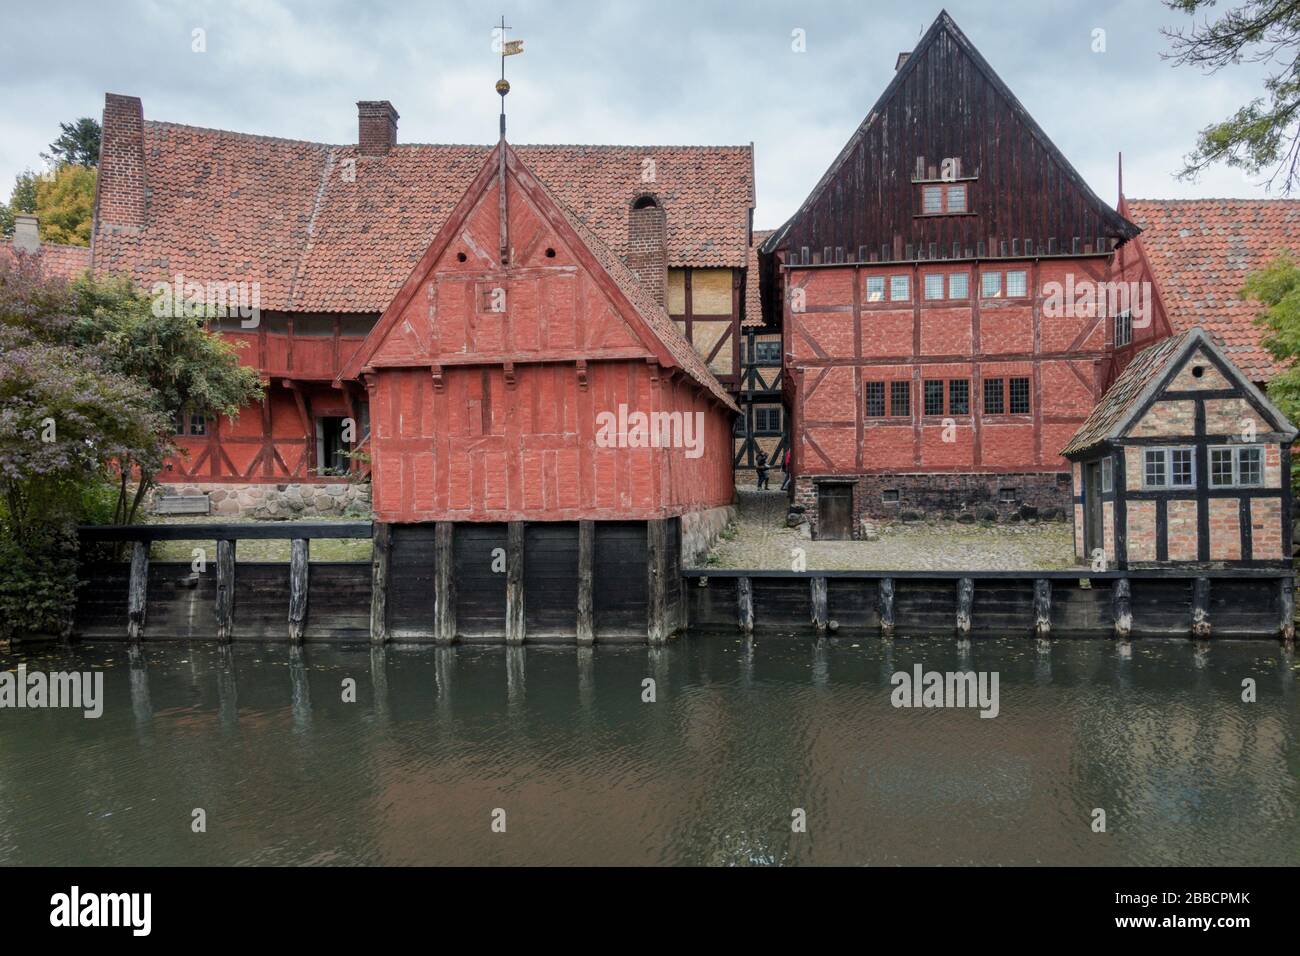 The Old Town, Den Gamle By, open air museum of of Urban History and Culture featuring period buildings in Aarhus, Denmark, Scandinavia Stock Photo